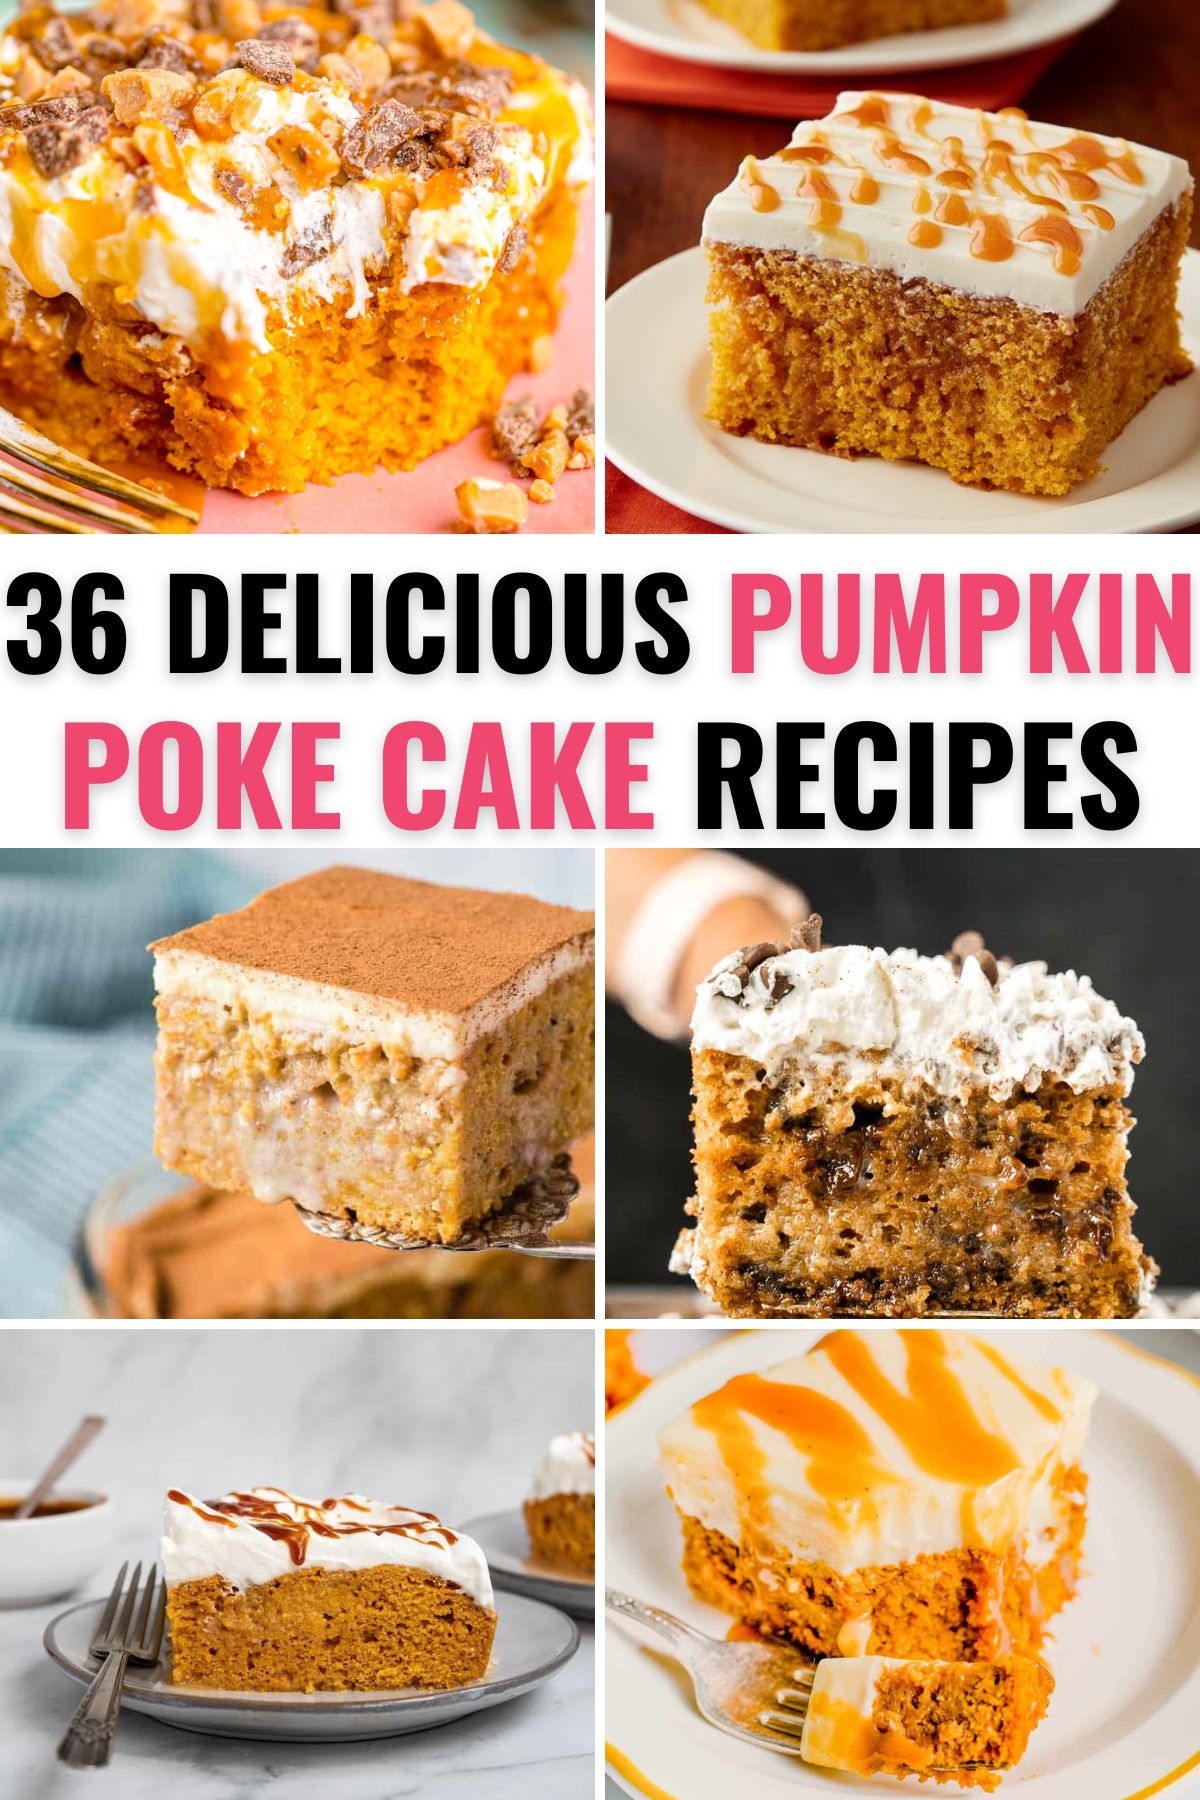 a collage of 6 images of slices of a pudding poke cake with title text reading 36 Delicious Pumpkin Poke Cake Recipes